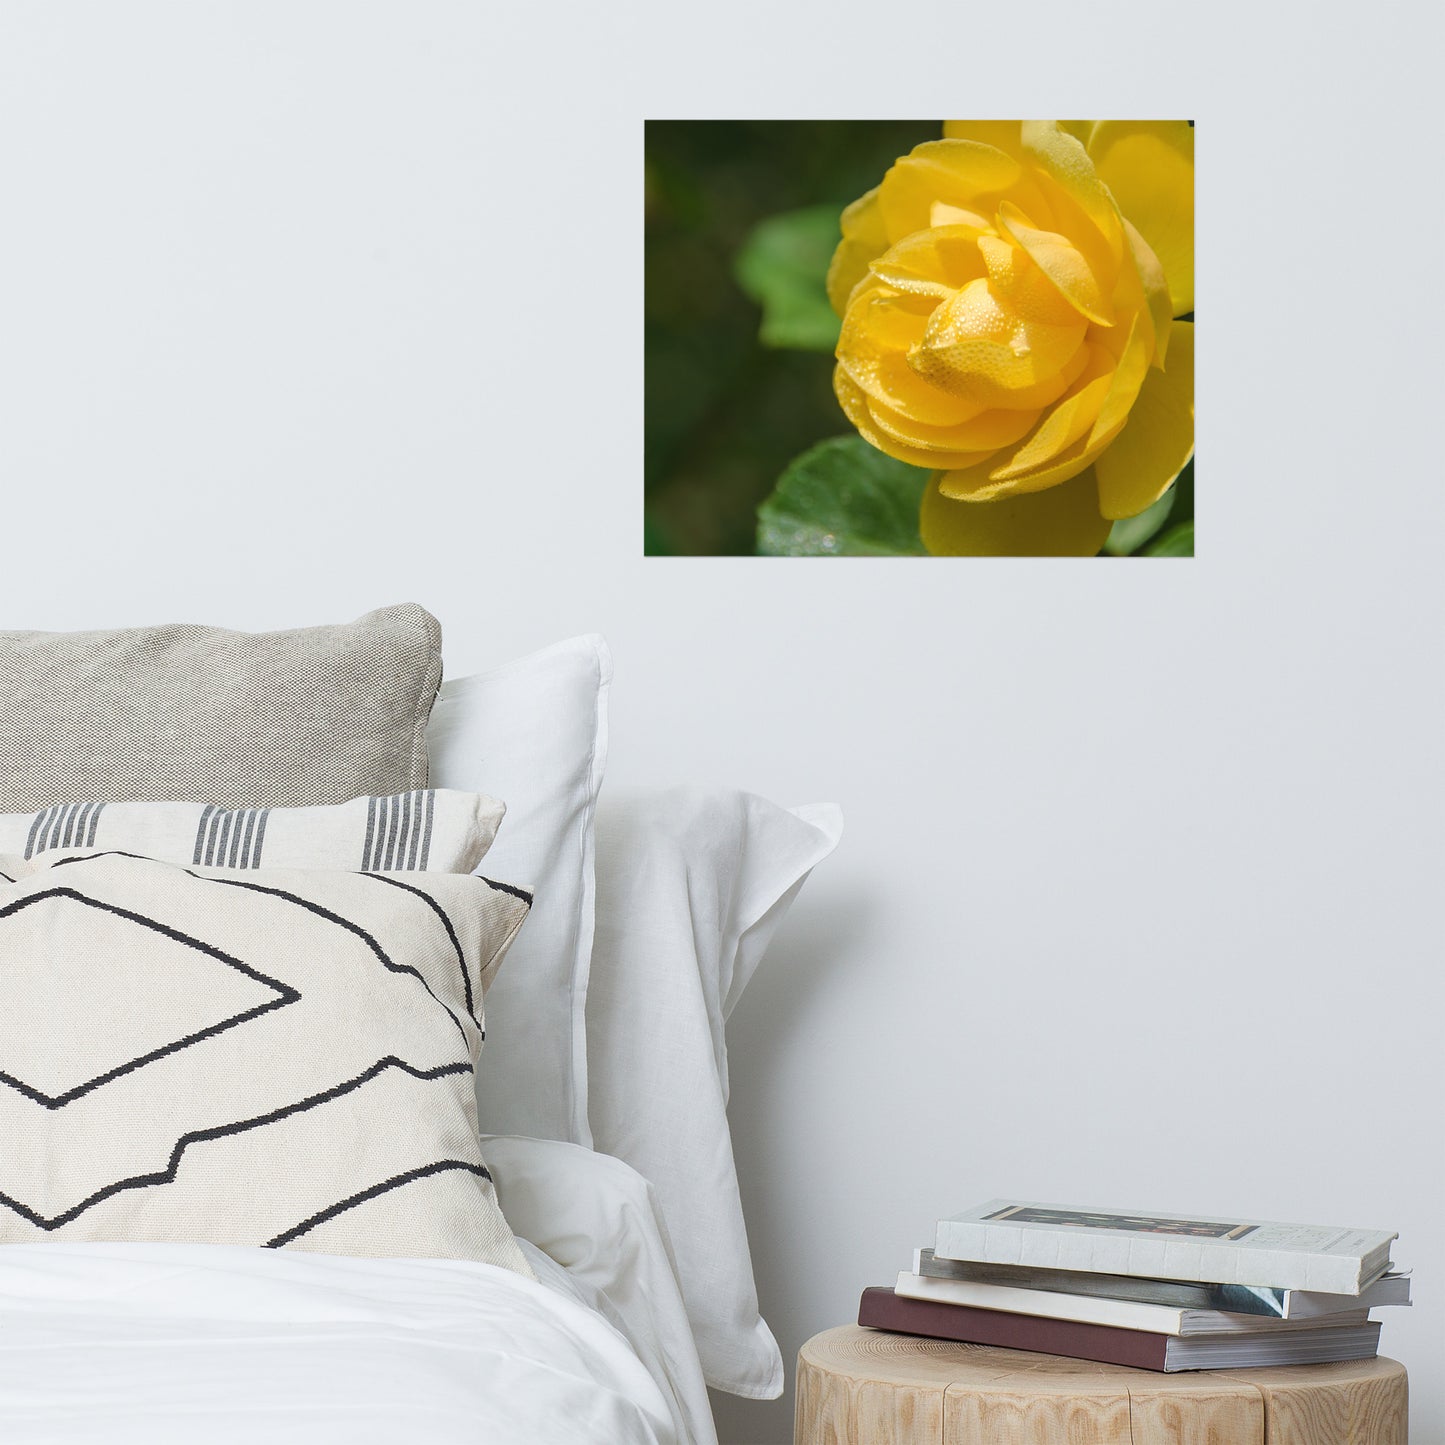 Friendship Rose Floral Nature Photo Loose Unframed Wall Art Prints